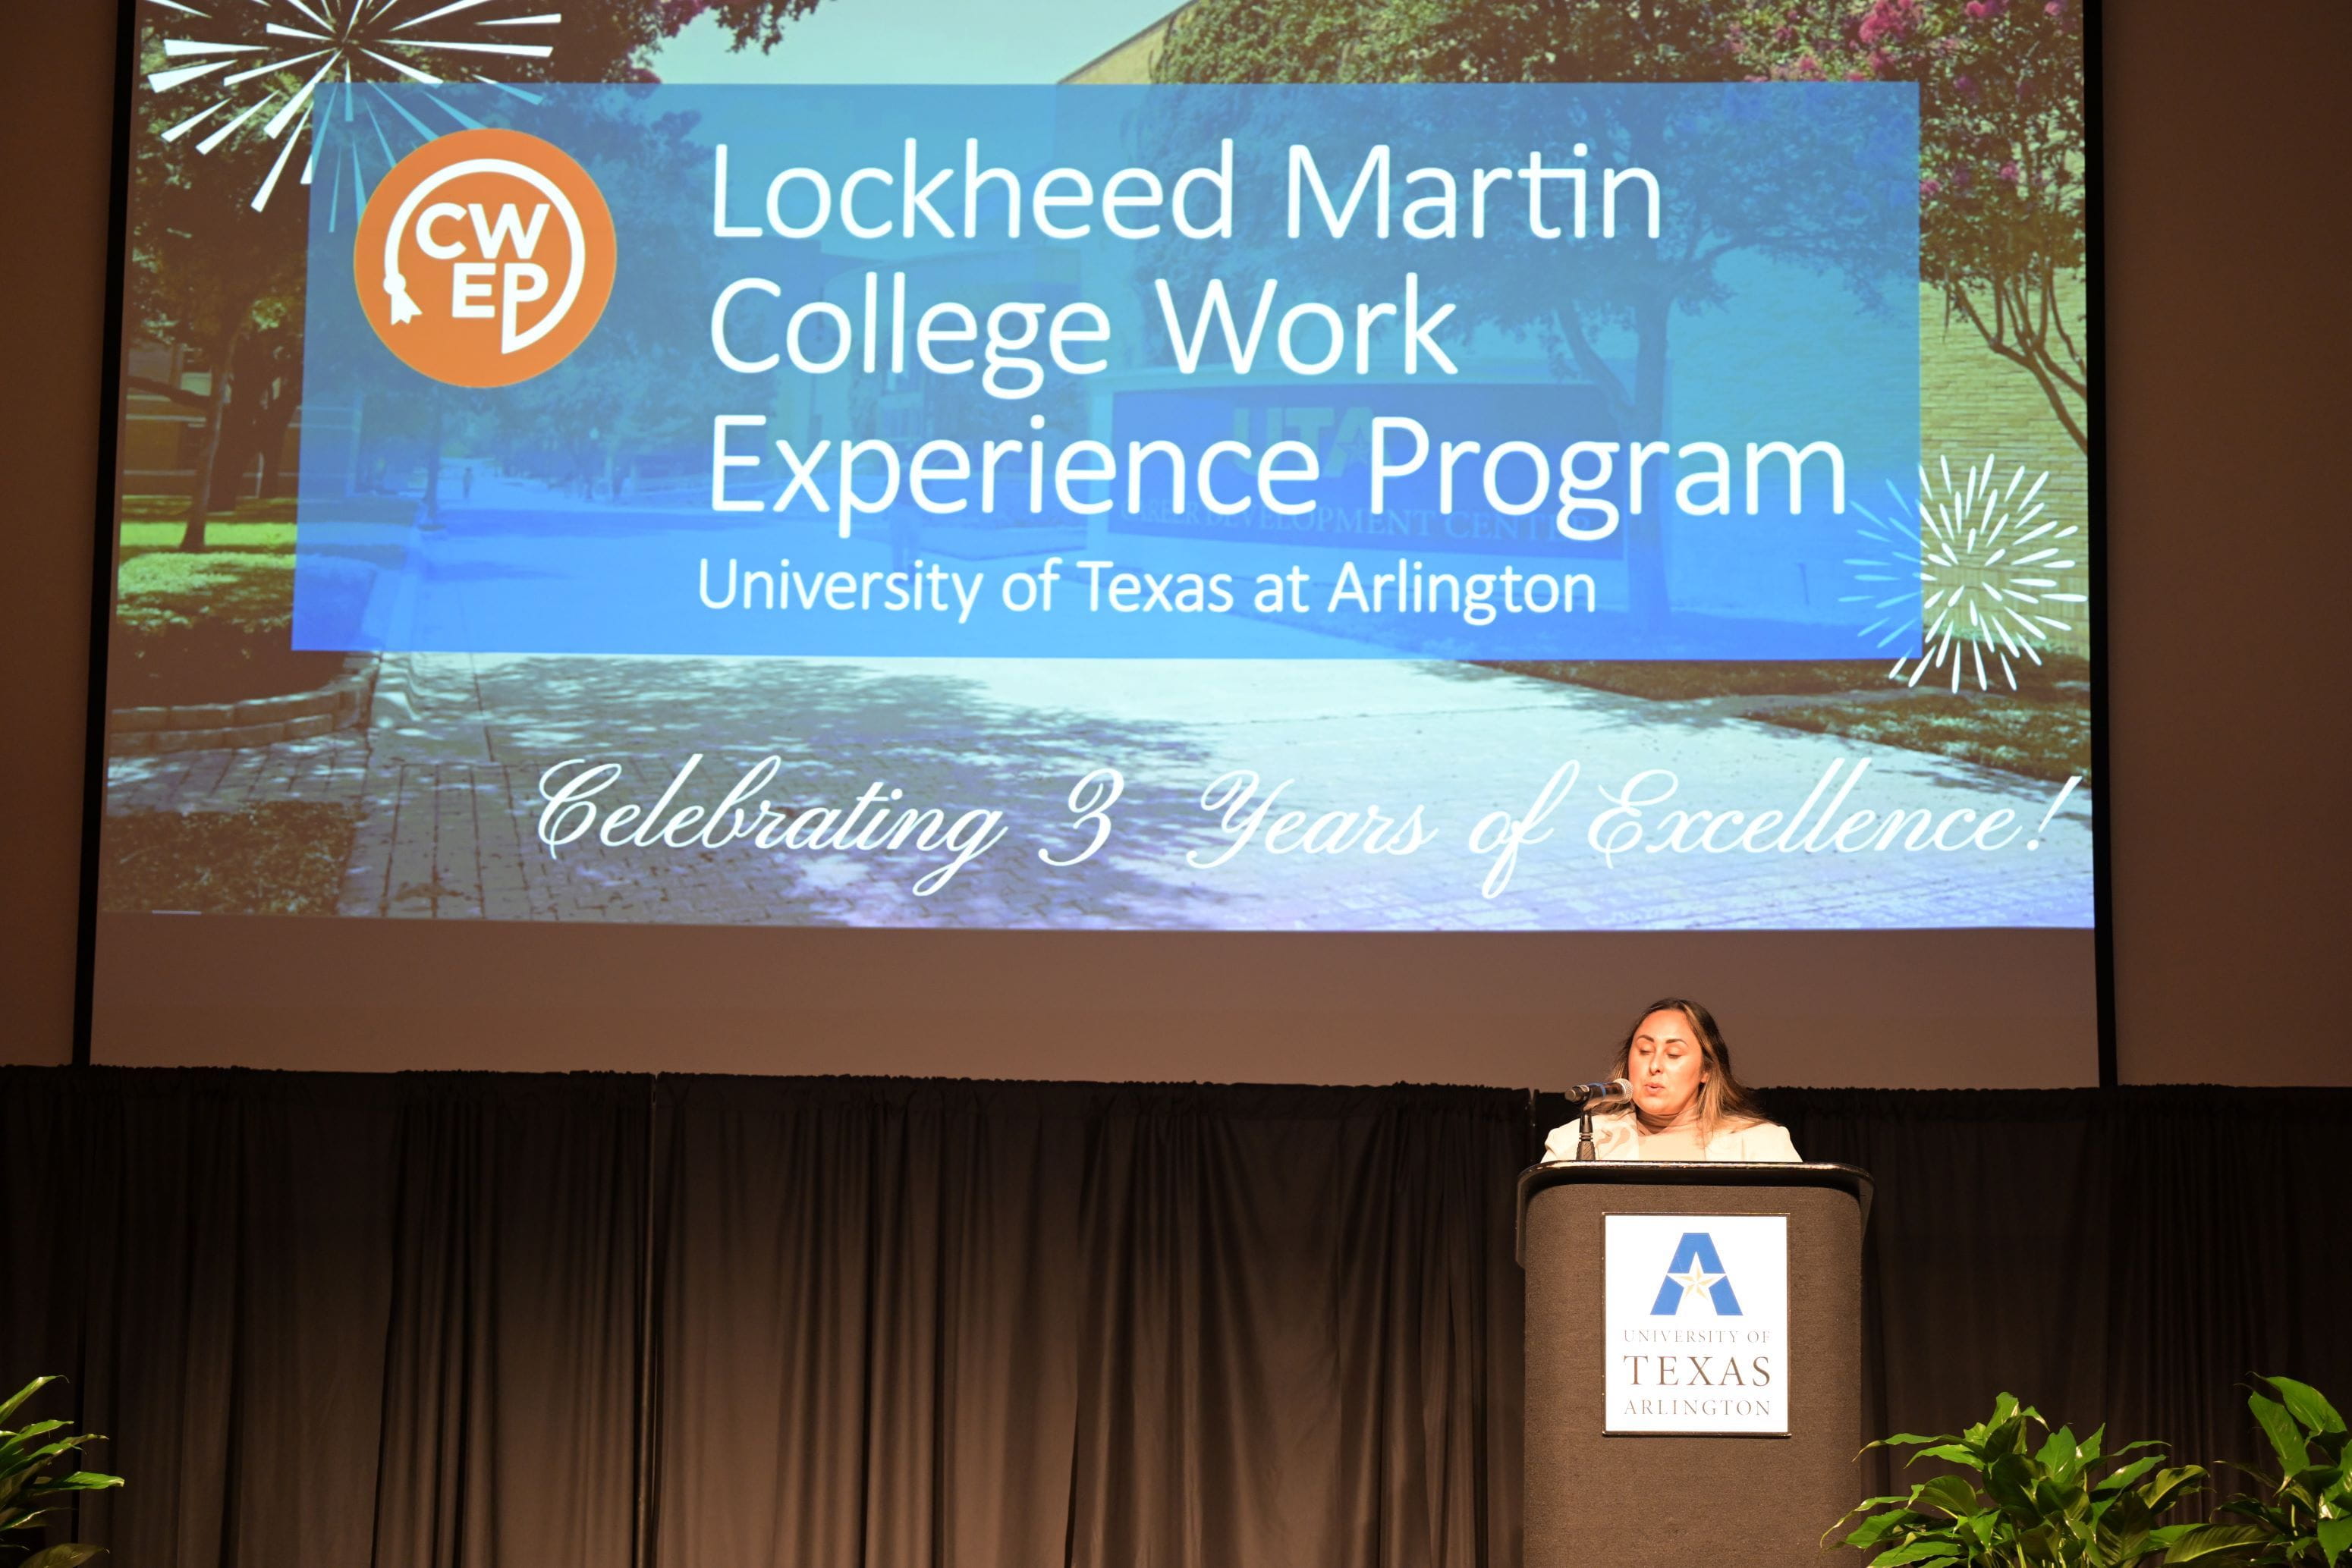 The College Work Experience Program event featured several students who participate in the UTA/Lockheed Martin program.